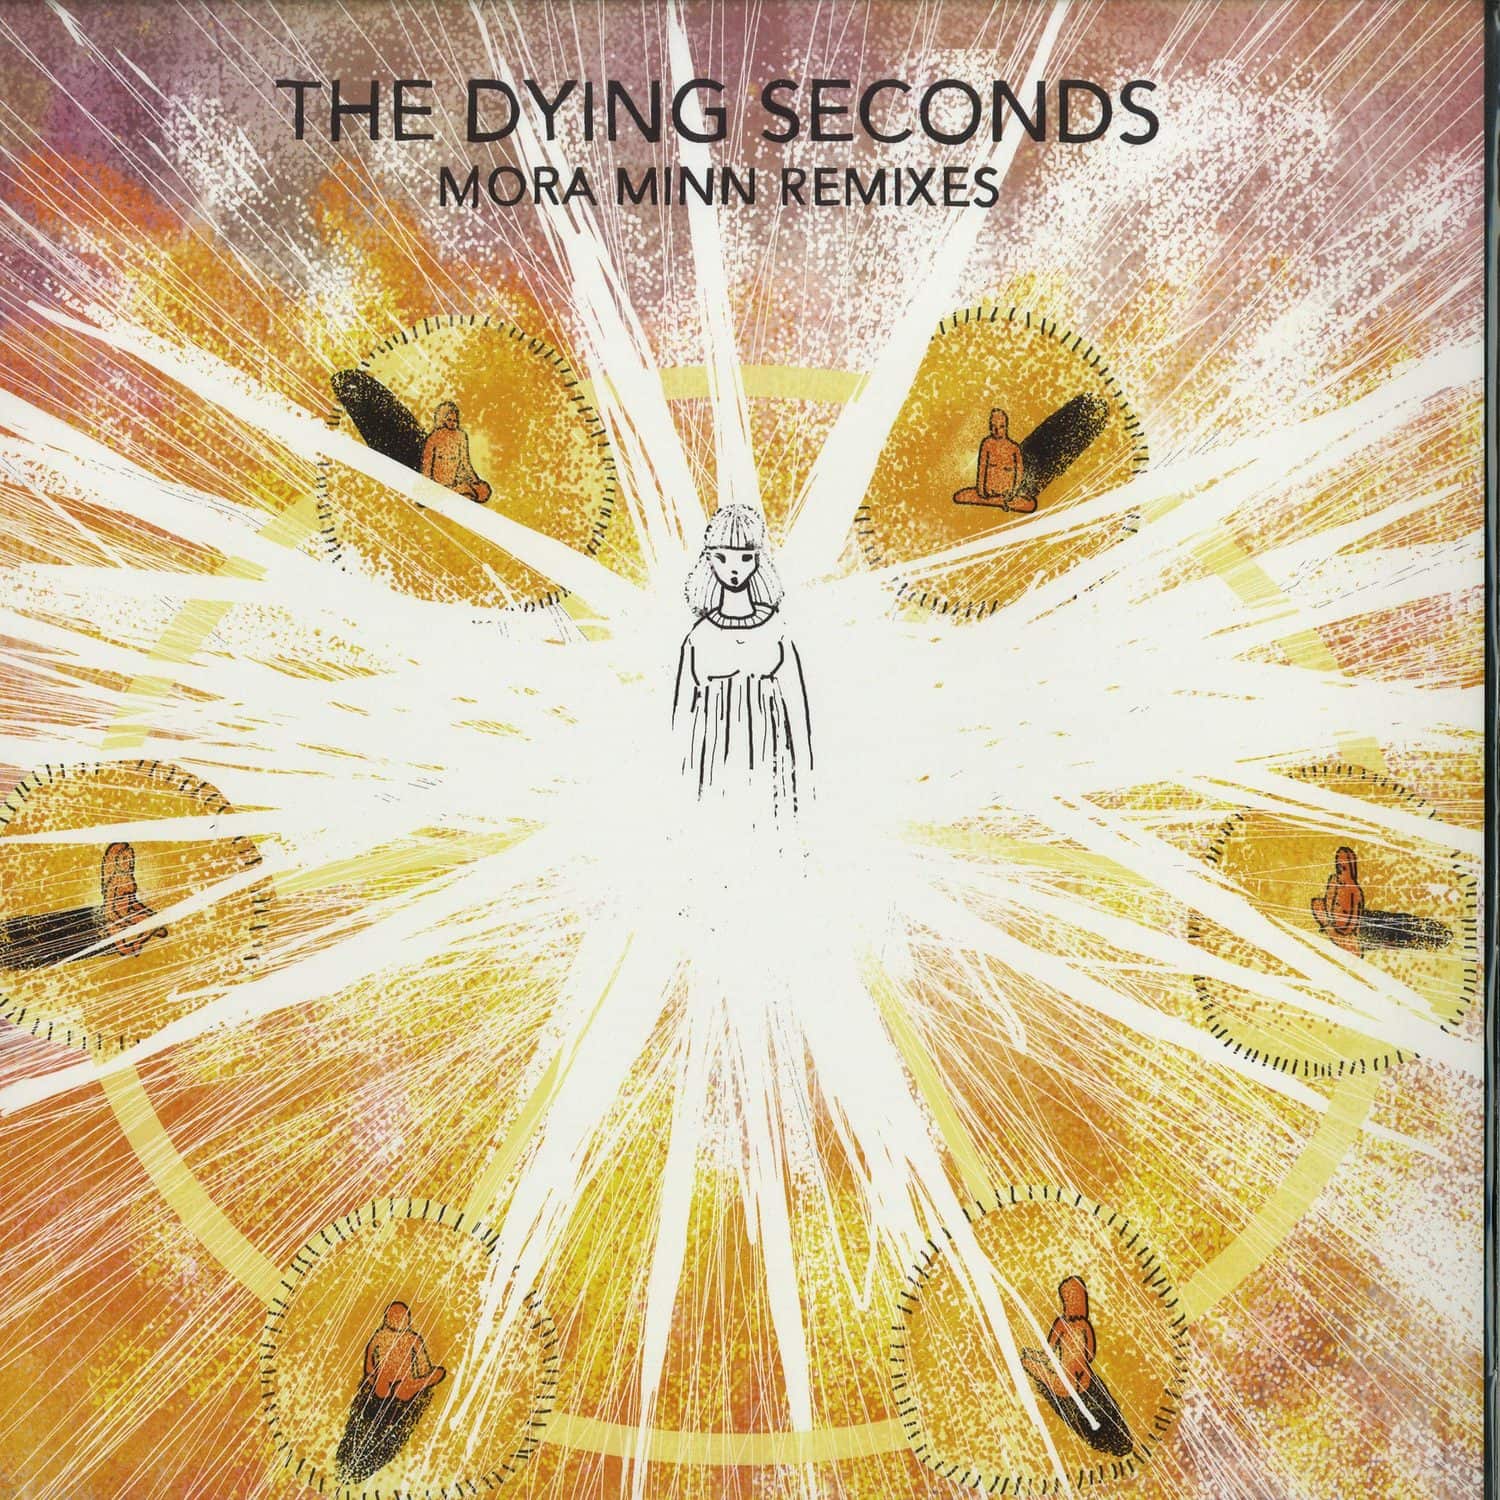 The Dying Seconds - MORA MINN 